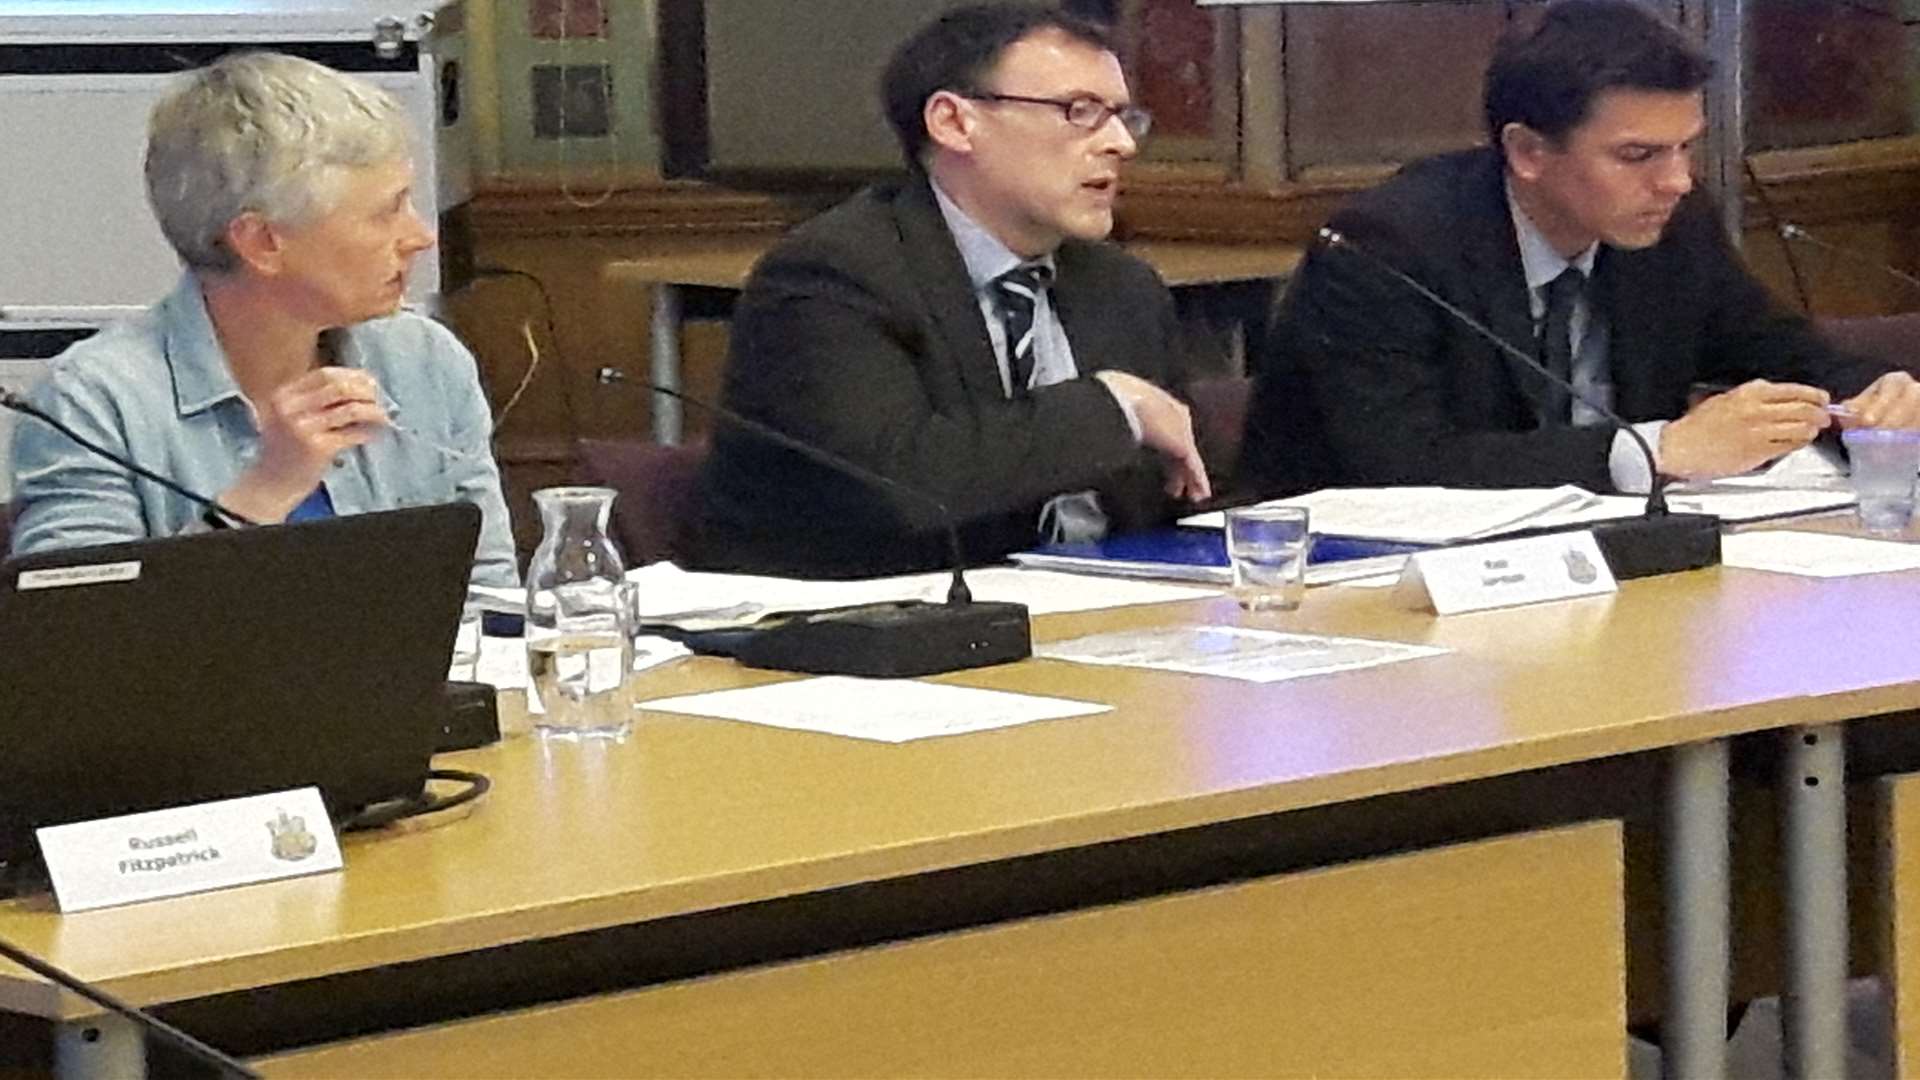 Cllr Janetta Sams, head of planning Rob Jarman and planning development manager James Bailey at the referrals committee meeting